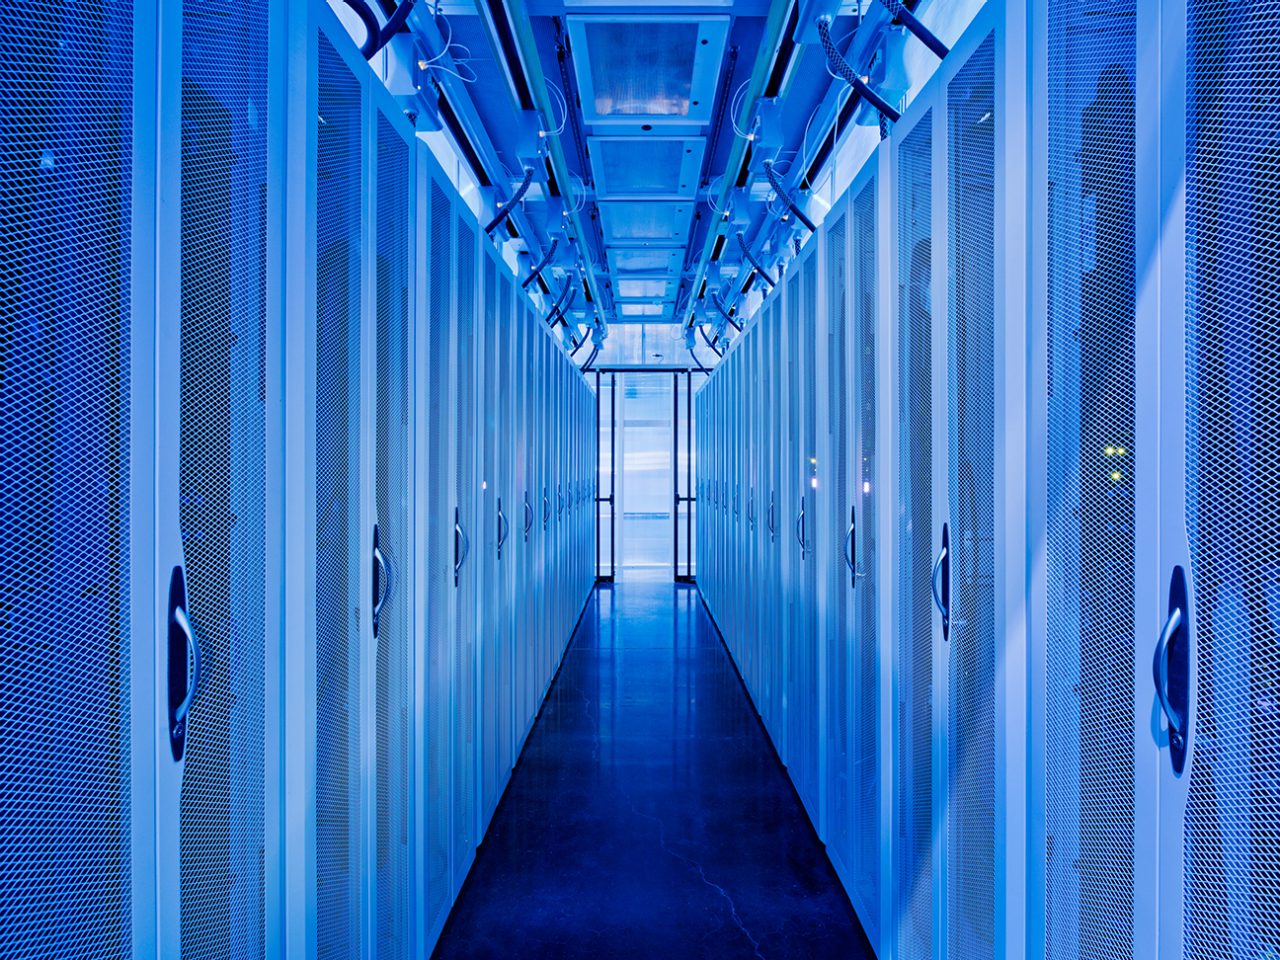 Aligned data centres have an industry-leading power use efficiency ratio